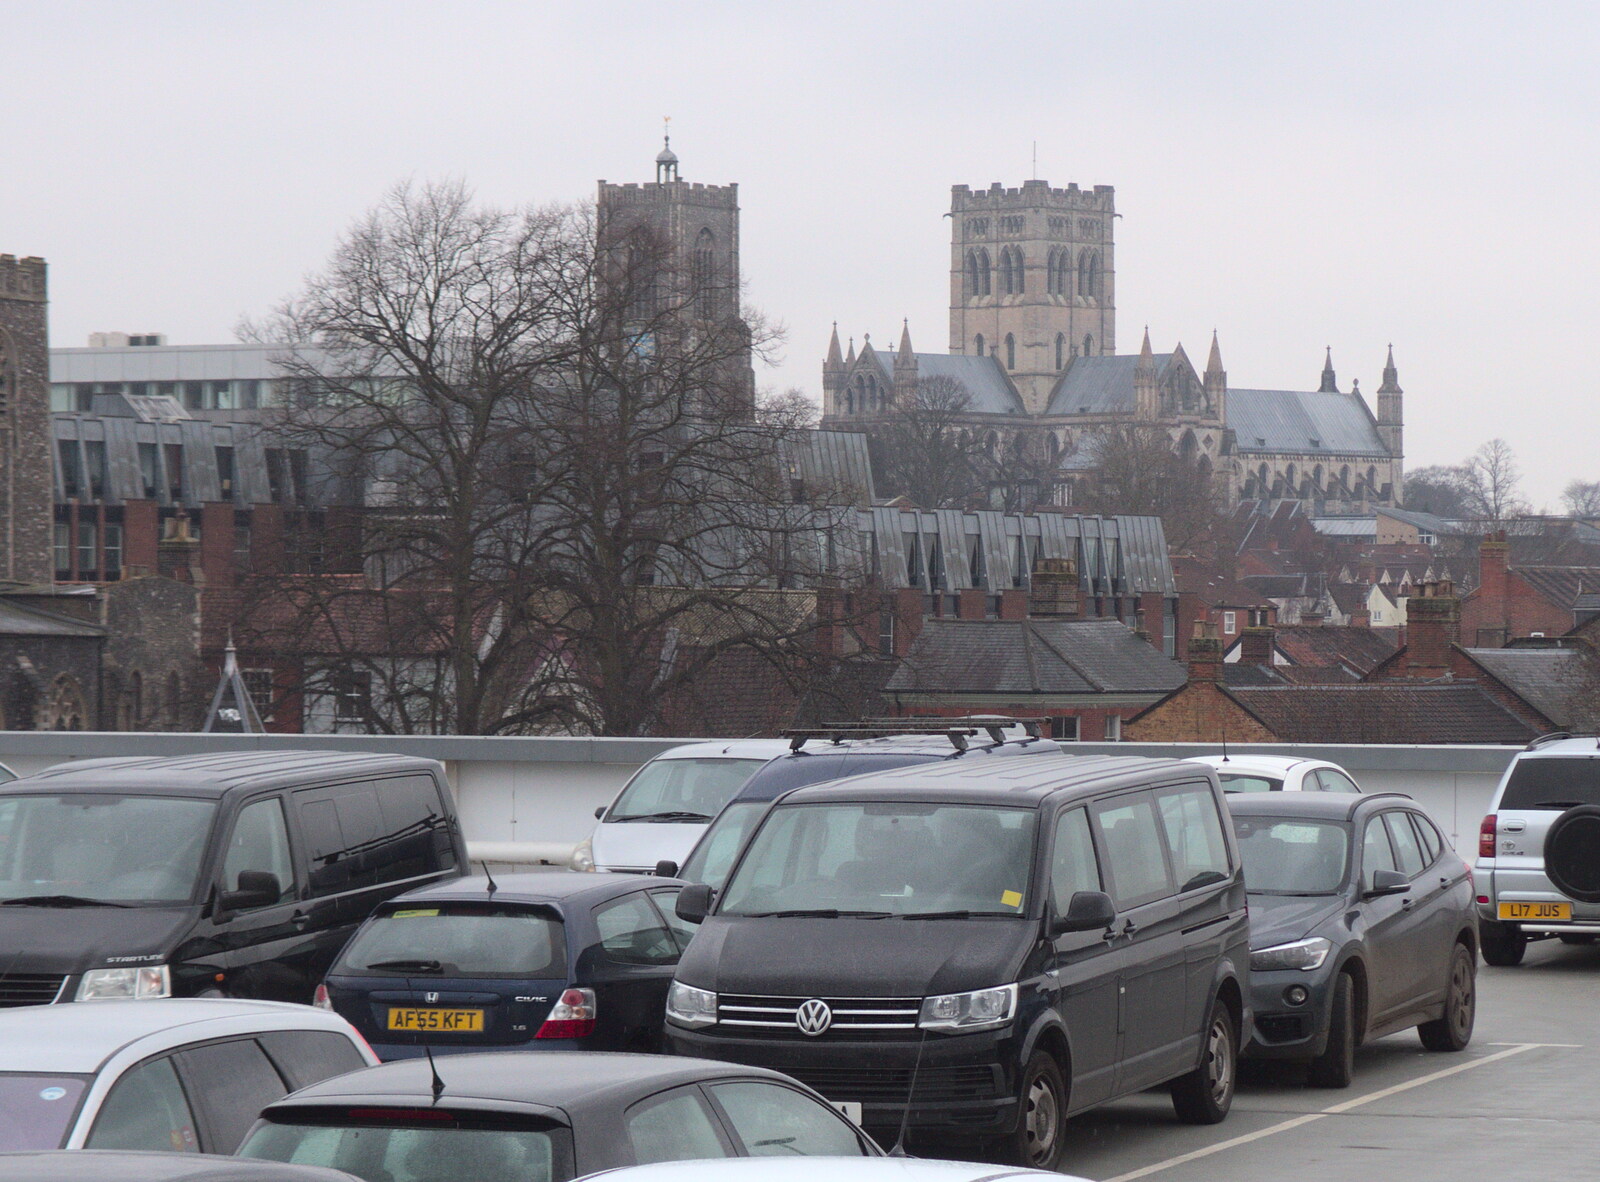 Two churches and a cathedral from A Couple of Trips to Norwich, Norfolk - 31st March 2018